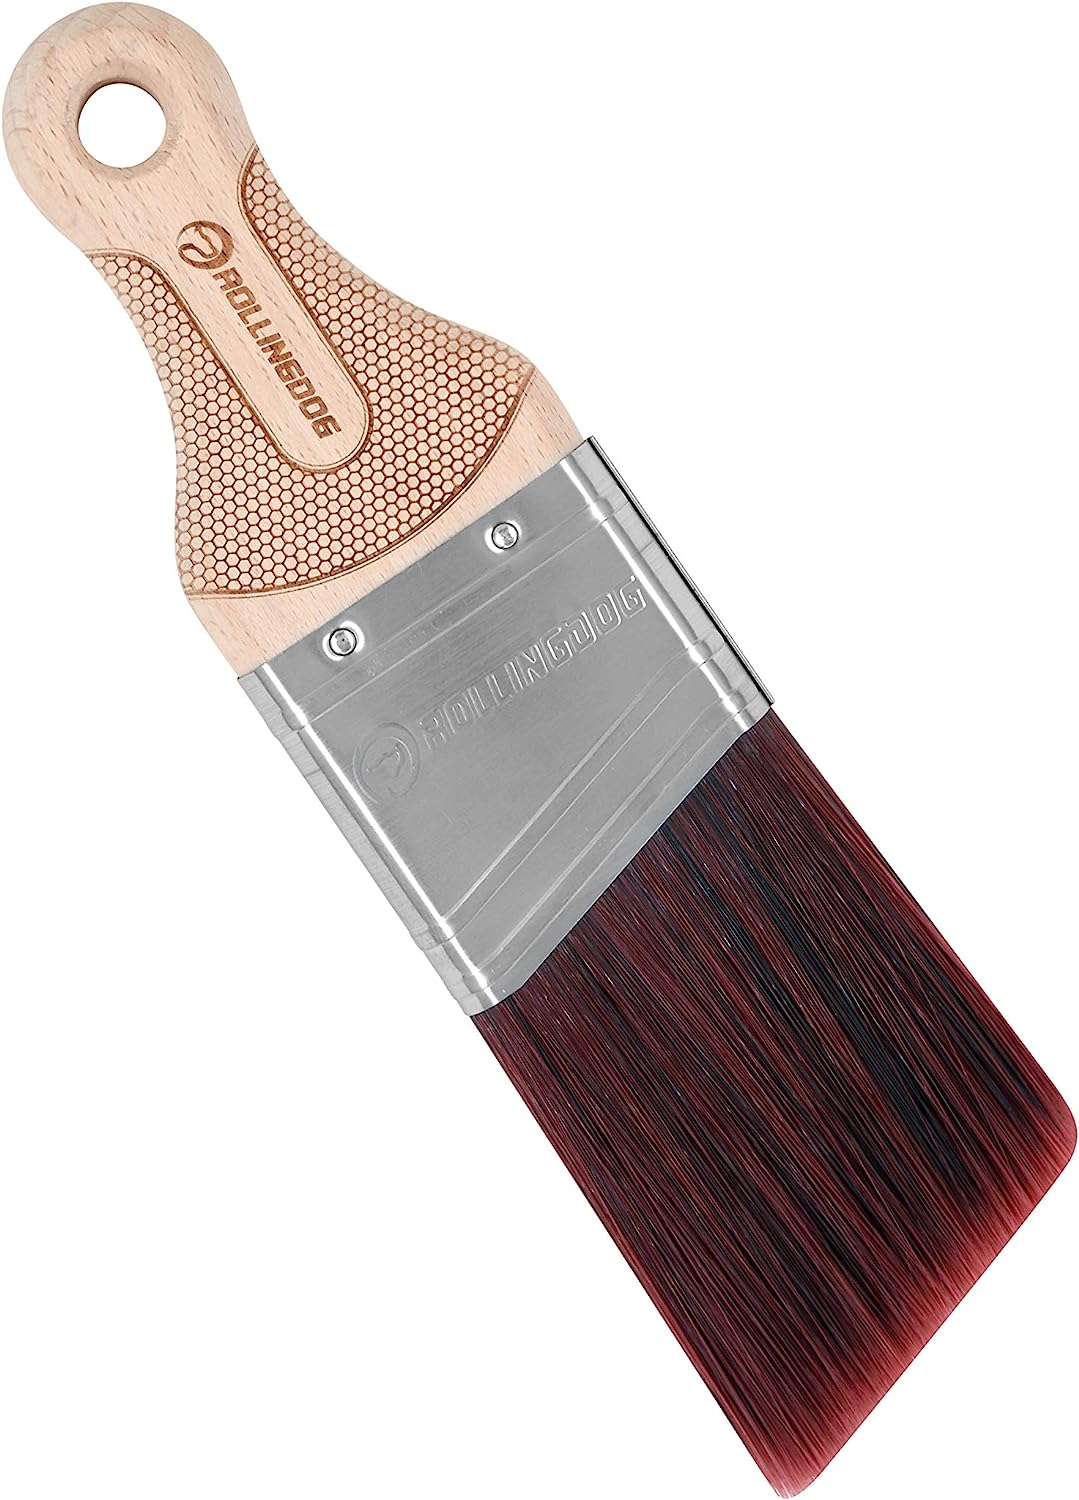 ROLLINGDOG 2 Inch Angled Paint Brush for Painting [...]